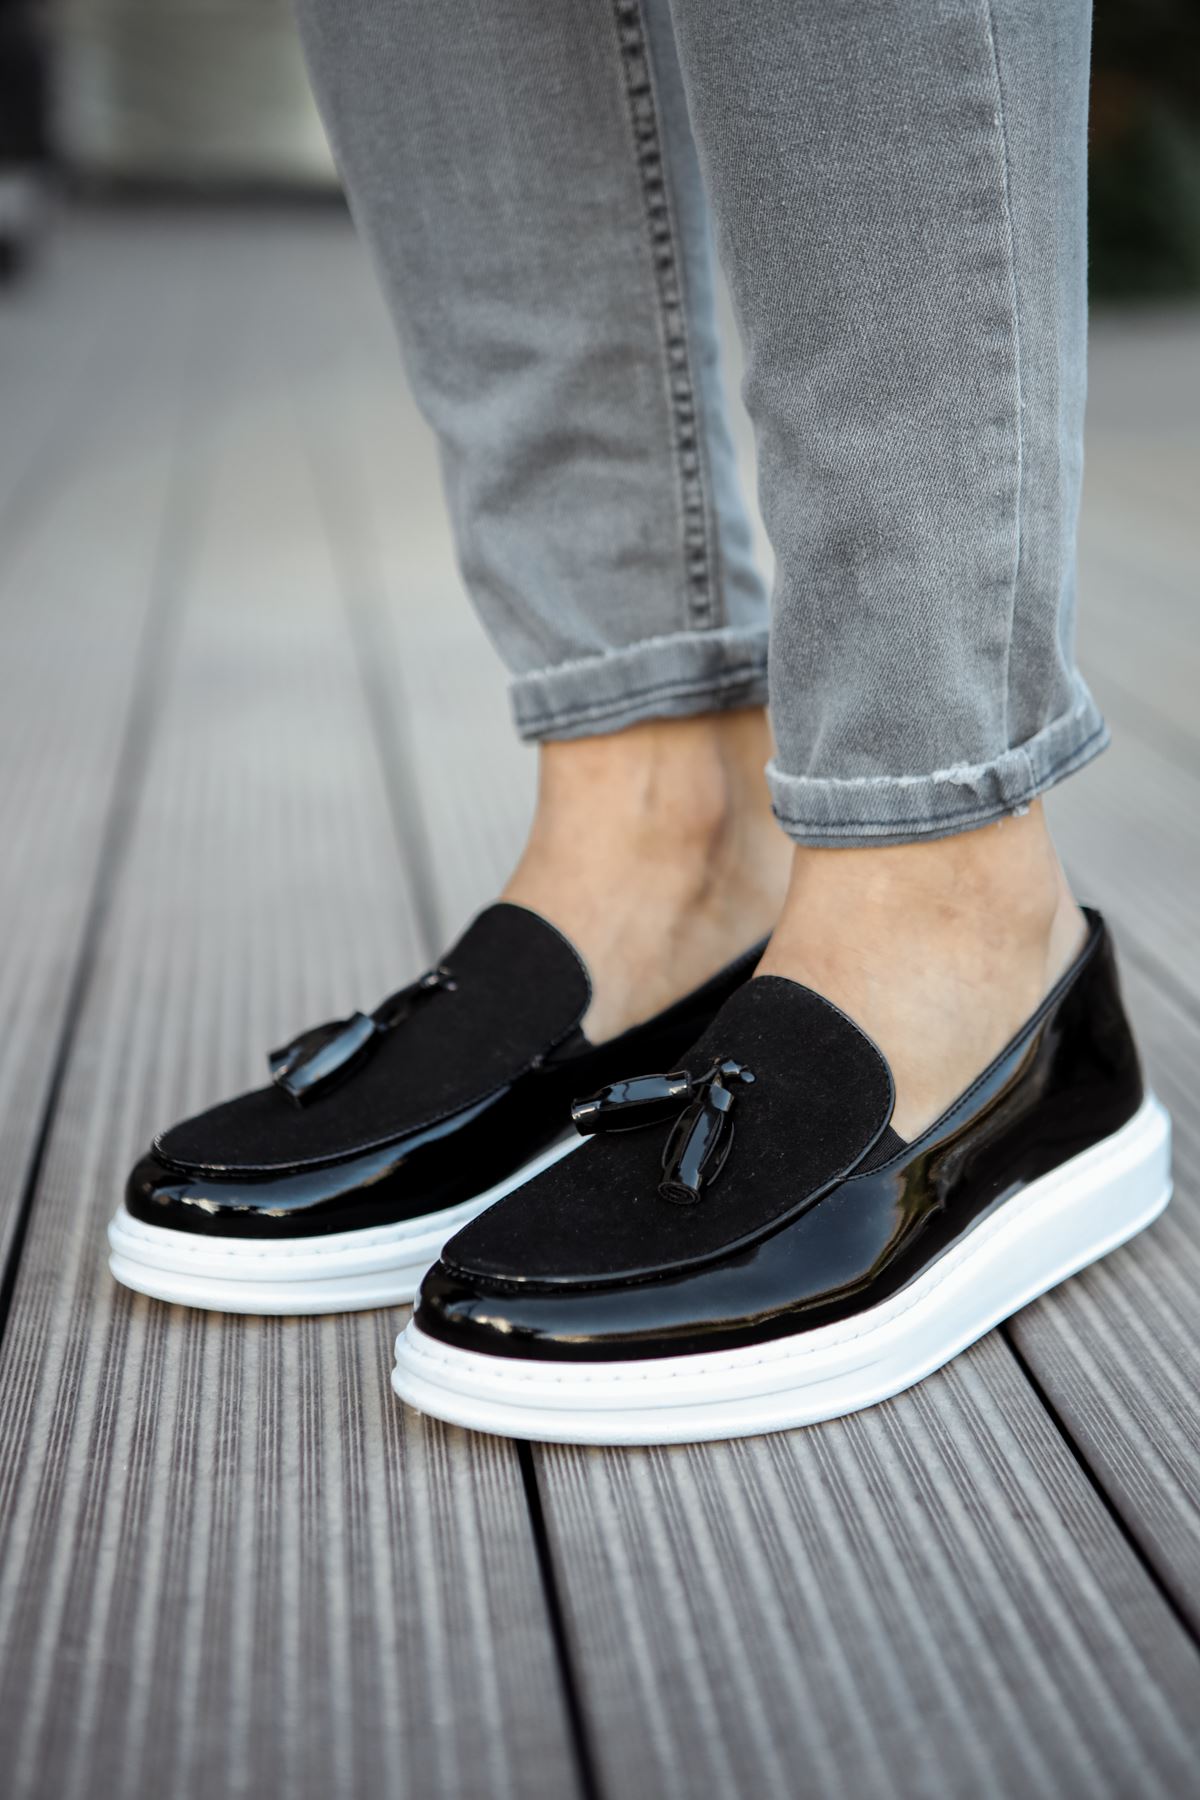 Chekich Shoes Black Men Dress Classic Polished Artificial Leather Slip On for Business White Outsole Luxury Suits Wear Footwear Blazer Wedding Italian Style Air Party Office Flat Vintage 2021 Formal Flats CH002 V1